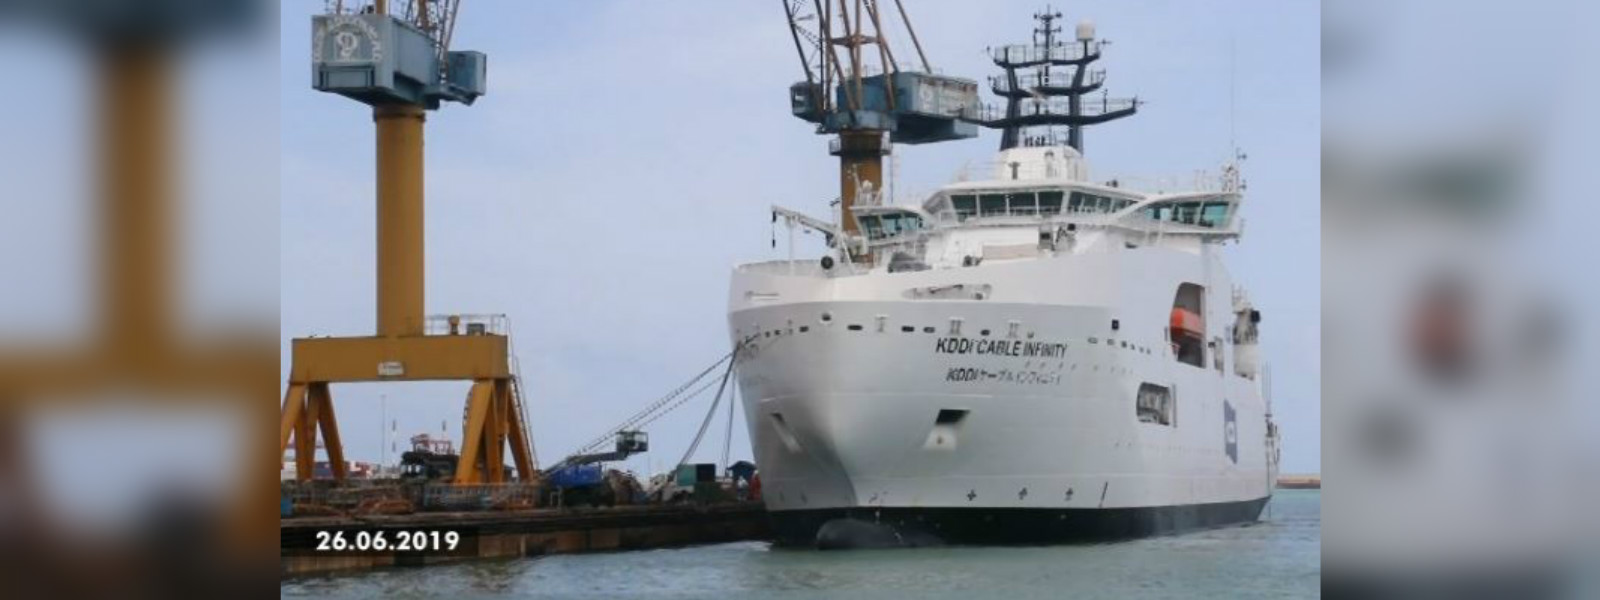 First ever modern cable laying vessel built in SL 